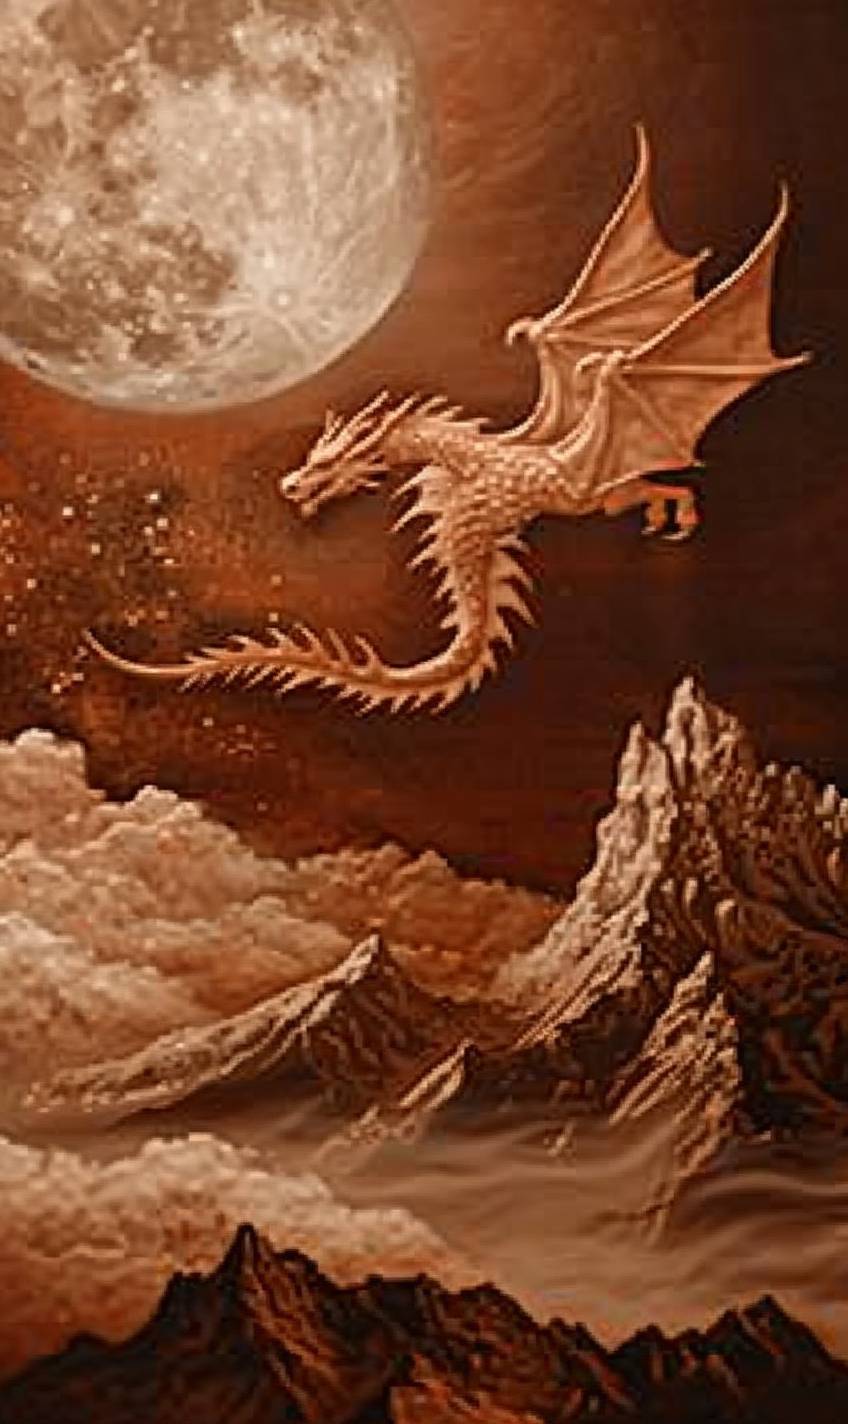 A mystical dragon is flying over a moonlit mountain range. The dragon's scales shimmer in the moonlight, and ethereal clouds and stars fill the sky.